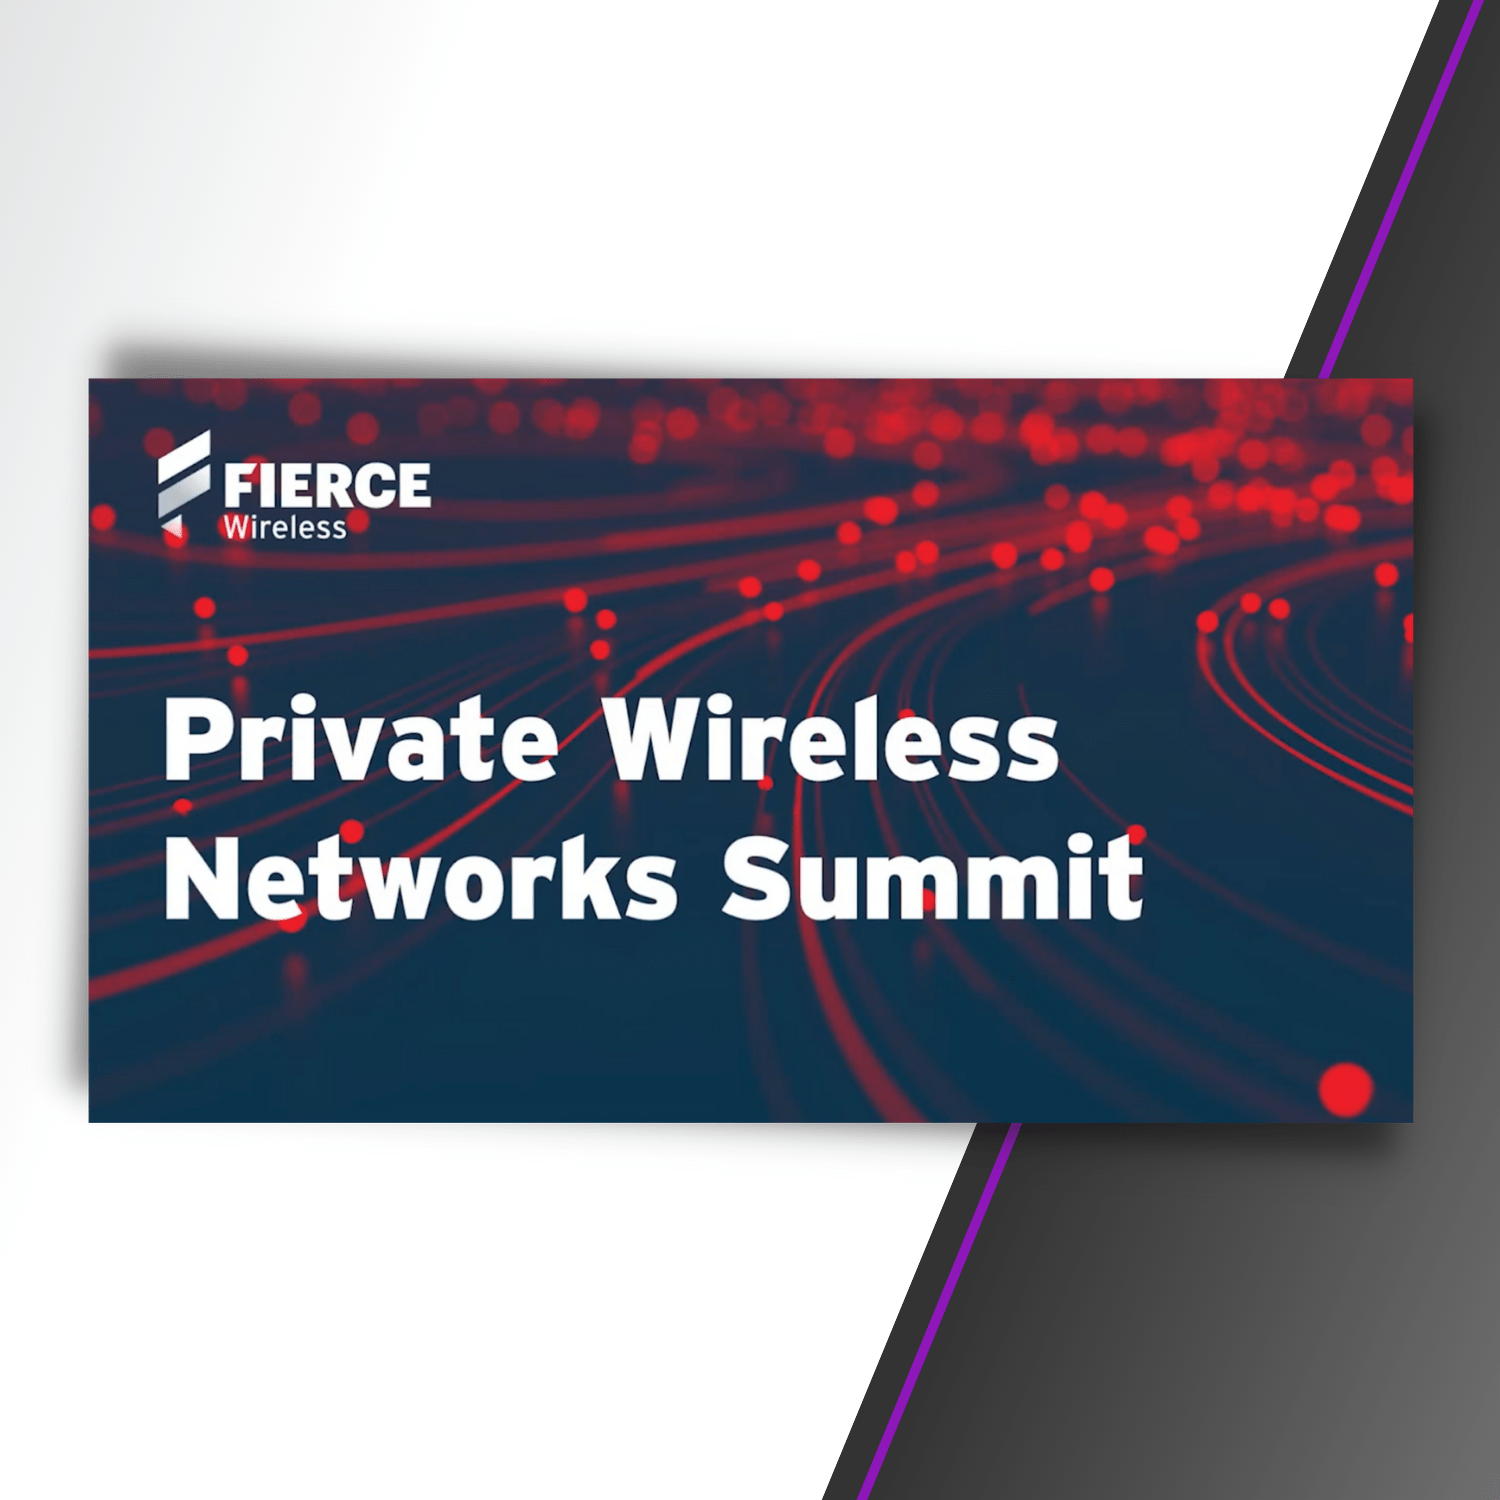 Private Wireless 2.0: What to Expect in 2021 and Beyond